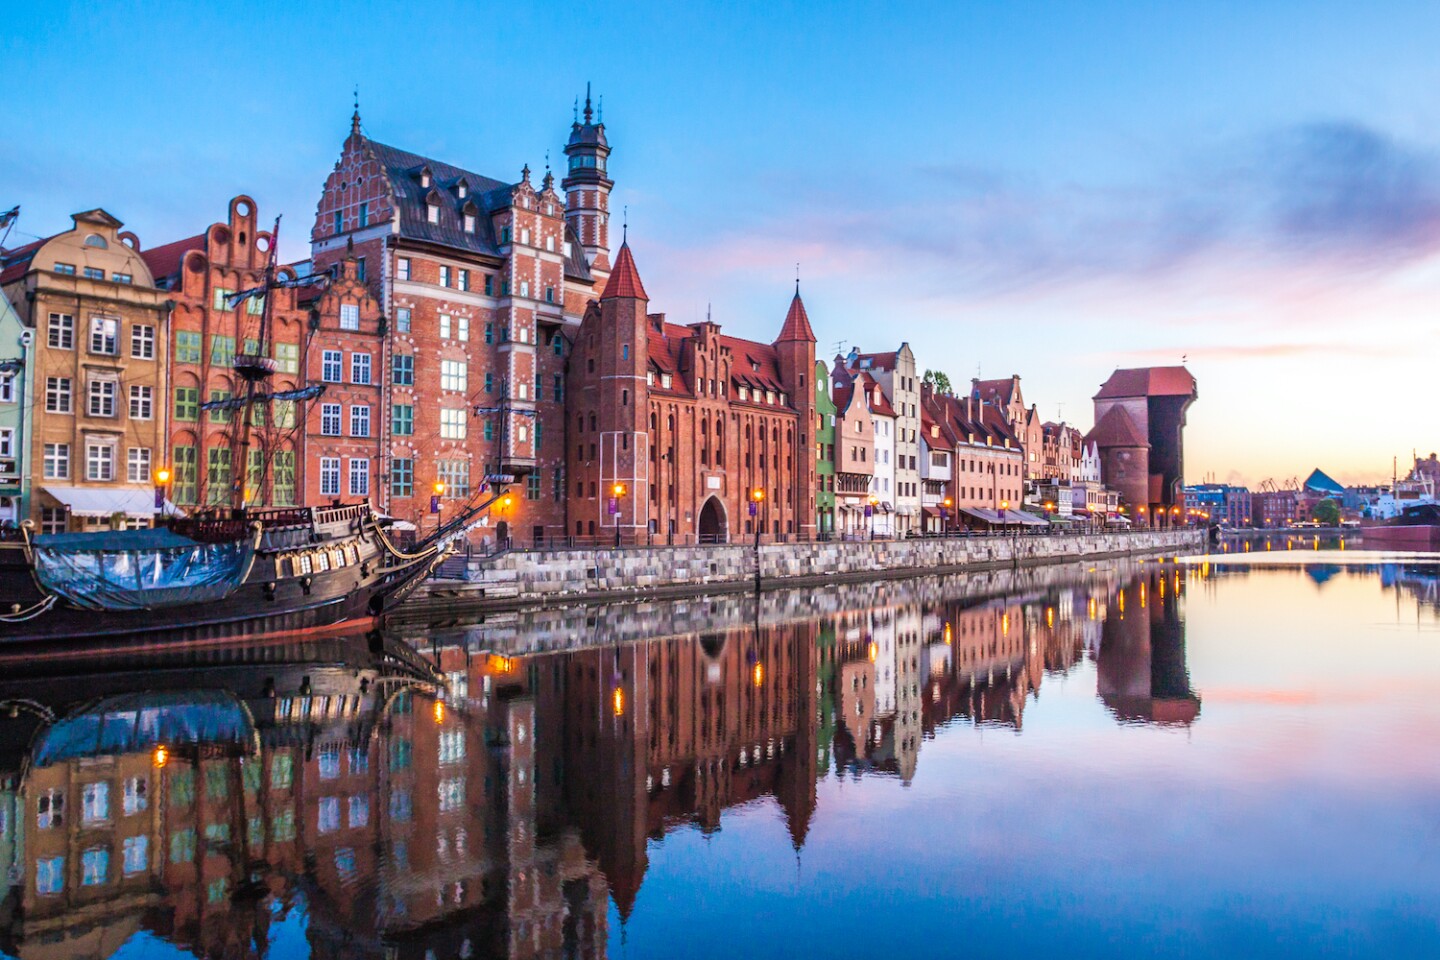 <h2>5. Gdańsk, Poland</h2> <p><b>August is great for: </b>Attending a fair older than America itself—and then some</p> <p>St Dominic’s Fair is one of the largest and oldest open-air markets in the whole continent; this year, it’s running through August 18. The tradition dates back eight centuries (yes, more than 750 years) when the then-Pope extended leeway to locals around the founder’s feast day. That indulgence eventually resulted in a month-long fair where treasures like silk, spices, cloth, and other goodies were traded, all against a boisterous backdrop full of parties and performances. It was largely abandoned as a result of World War II, but was revived in the 1970s. It’s now bigger and better than ever, with more than 1,000 artisans and traders shilling their wares, mostly suitcase-sized, souvenir-ready trinkets like picture frames.</p> <p>Combine a trip to this traditional fiesta with some time by the sea: Gdańsk, a longtime shipping hub, sits on the Baltic in a region once known as the Polish Riviera. Try the family-friendly Stogi Beach, or take a short taxi ride outside town to the Sobieszewo promontory for a quieter, more nature-forward afternoon by the water.</p> <h3>Where to stay: Gotyk House</h3> <ul>   <li><b>Book now:</b> <a class="Link" href="https://gotykhouse.eu/index.php/pokoje-apartamenty/#" rel="noopener">Gotyk House</a></li>  </ul> <p>Fittingly for a centuries-old fair, bunk down in this 15th-century family home that’s been converted into a shabby chic boutique hotel, with antique-filled rooms and a cozy vibe.</p> <h3>How to get to Gdańsk</h3> <p>Hop on national carrier LOT’s direct, non-stop service from JFK to the capital. From there, it’s a four-hour drive from Warsaw to Gdańsk.</p>